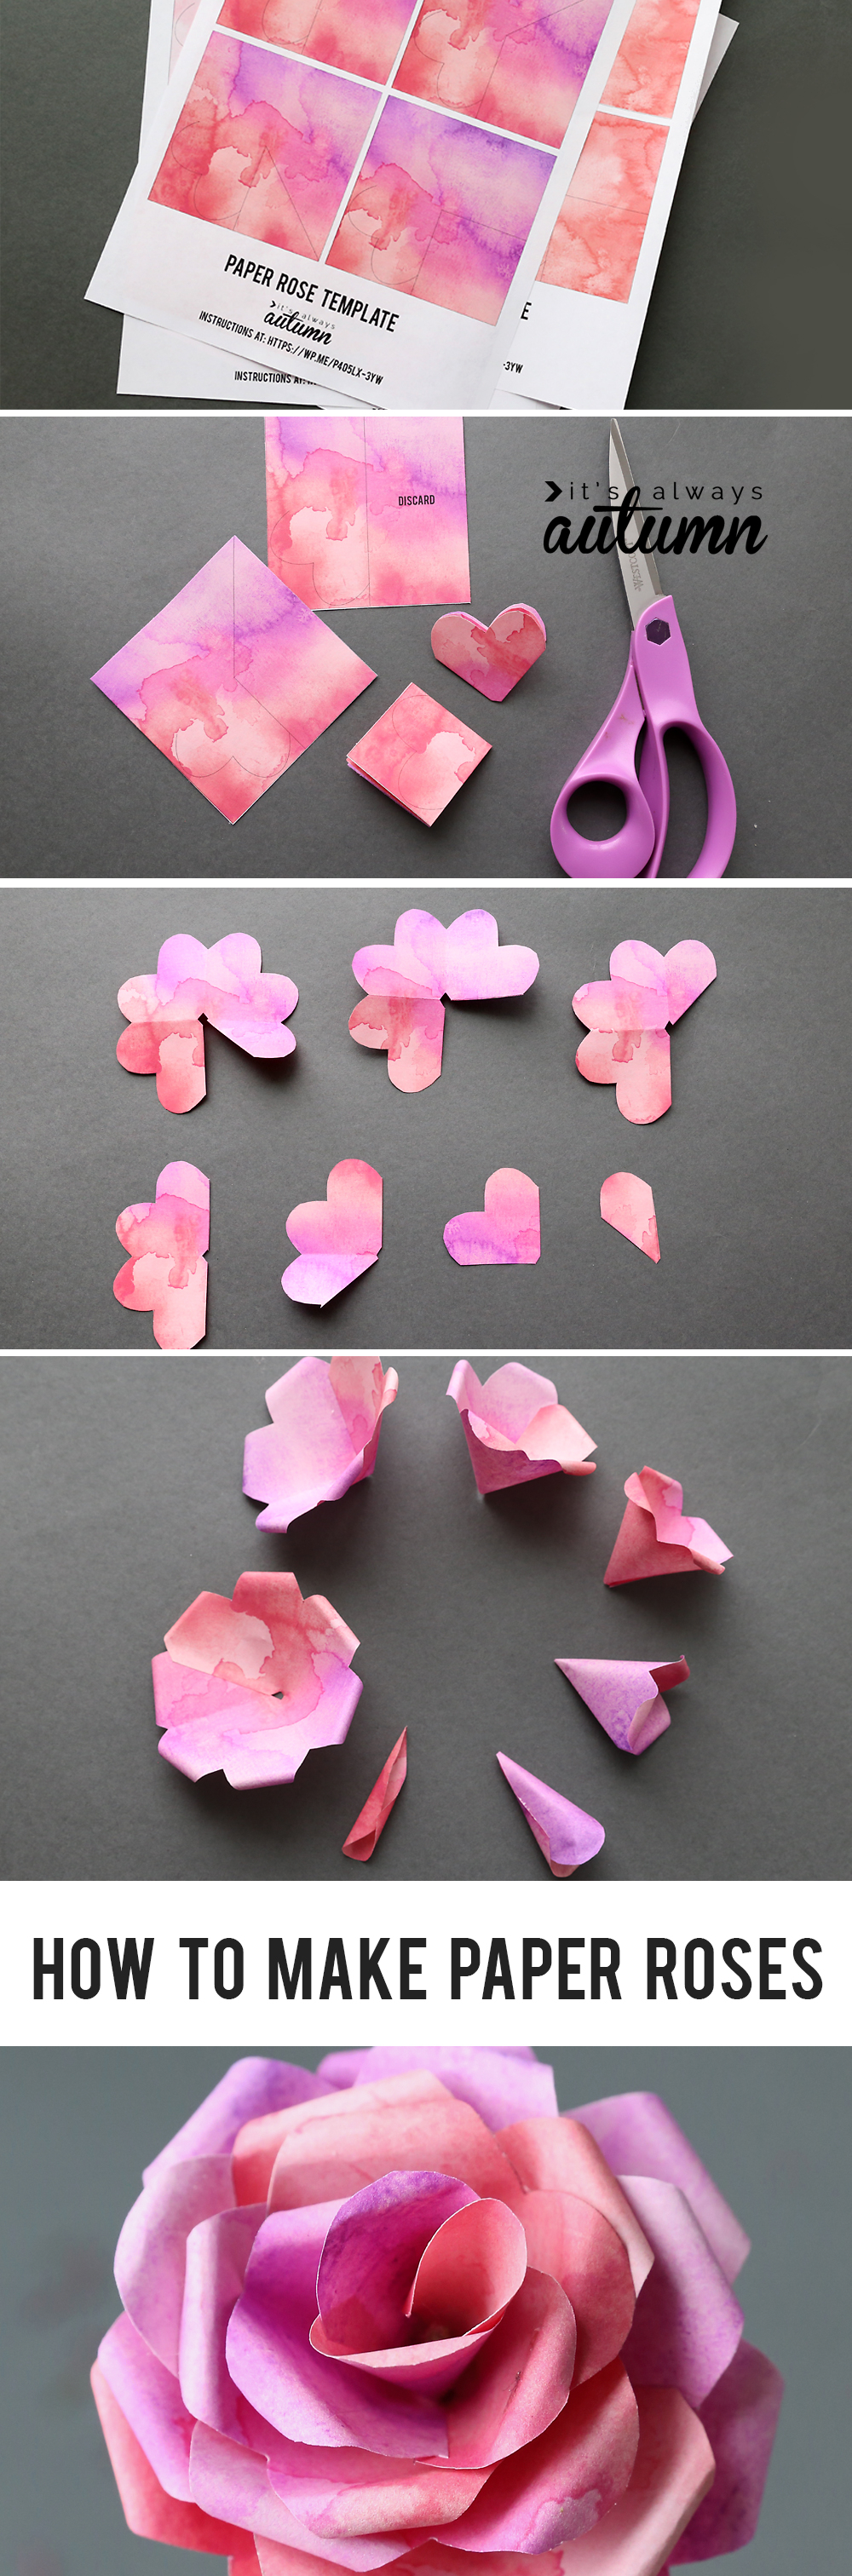 How To Make A Flower Origami Step By Step Make Gorgeous Paper Roses With This Free Paper Rose Template Its